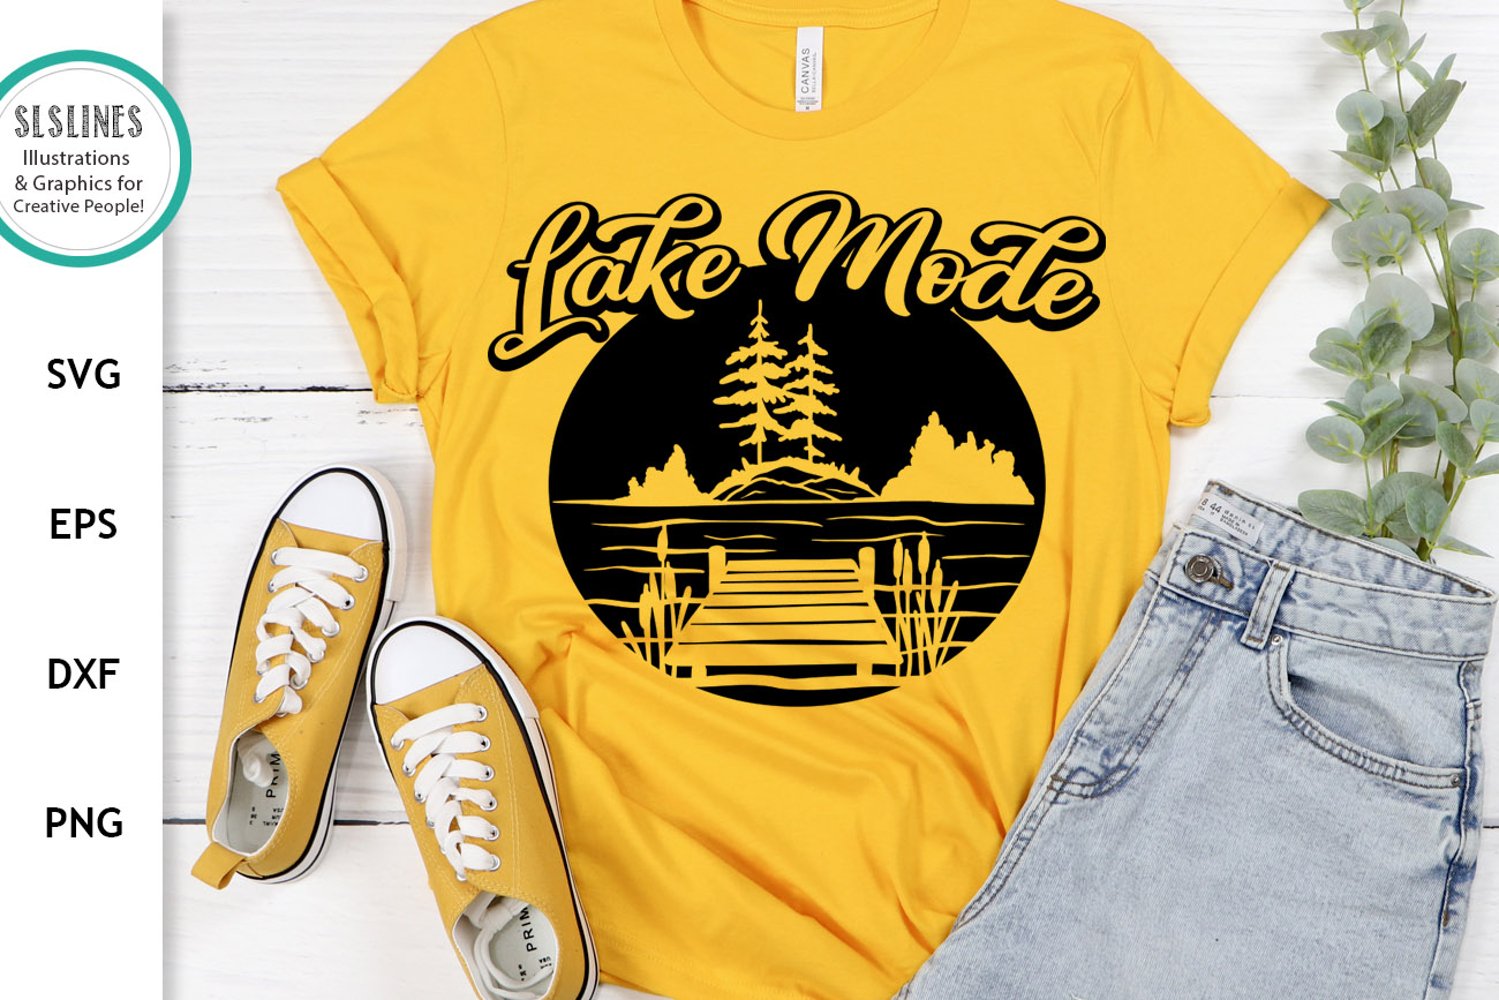 Yellow t-shirt with lake vibes.